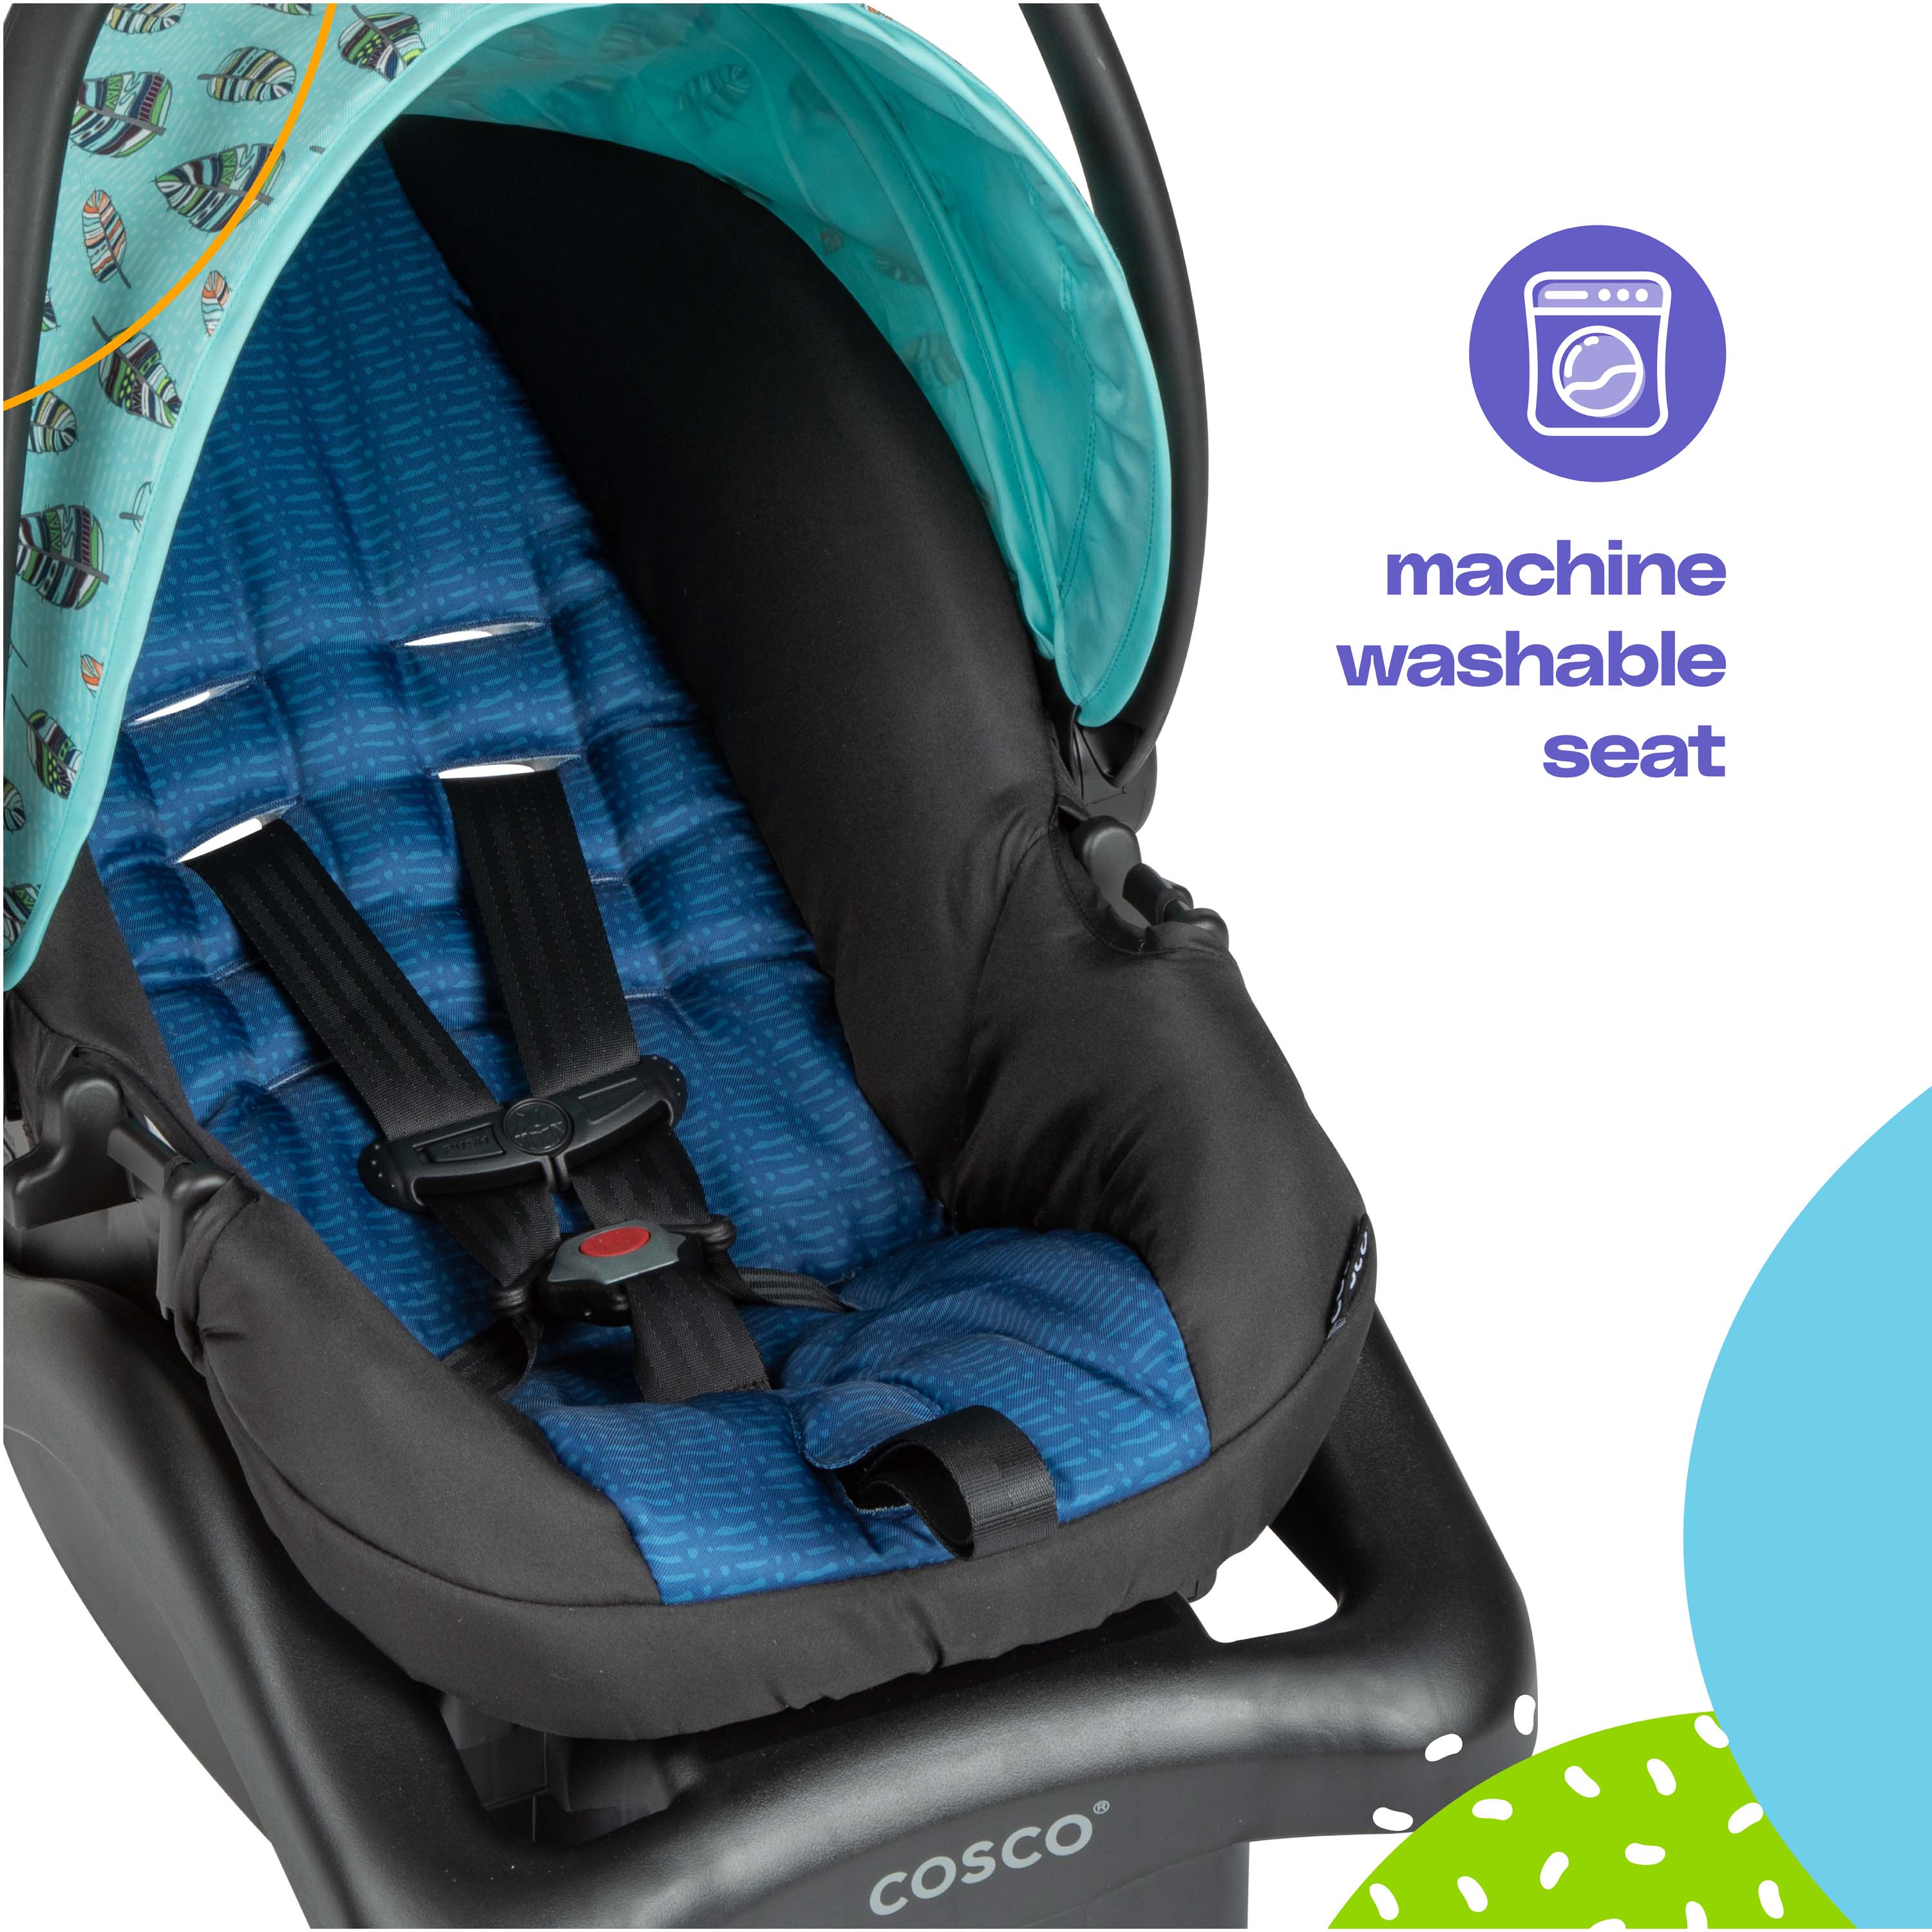 Cosco Lift & Stroll DX Travel System, Featherly - image 4 of 18